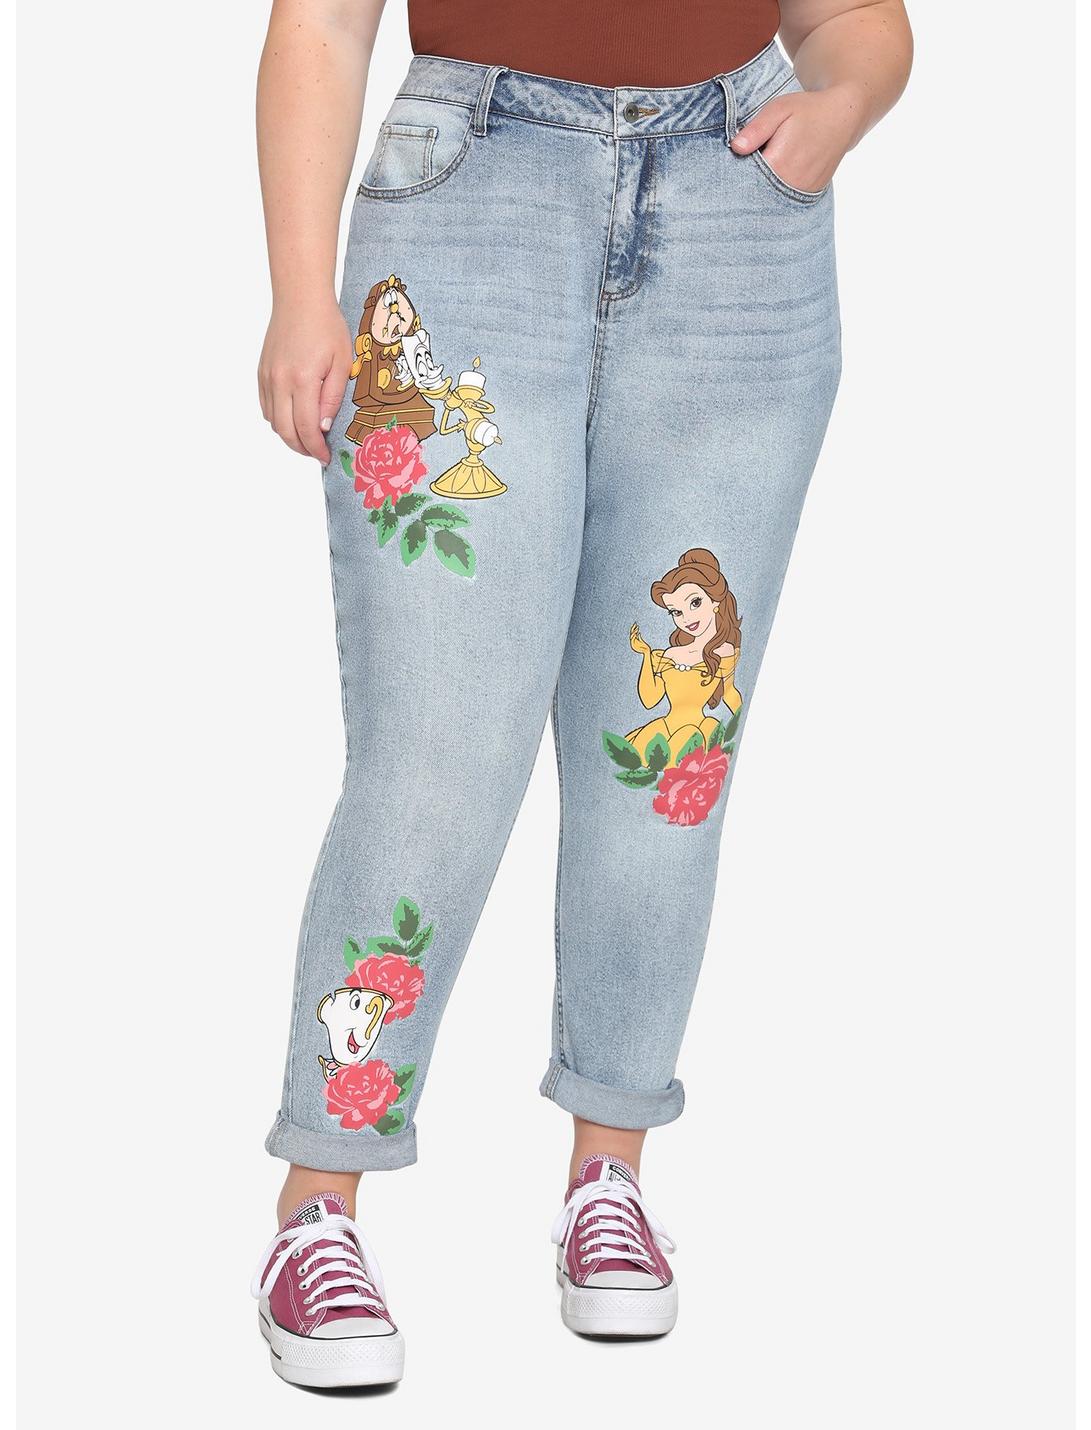 Disney Beauty And The Beast Roses Mom Jeans Plus Size, INDIGO WASH, hi-res